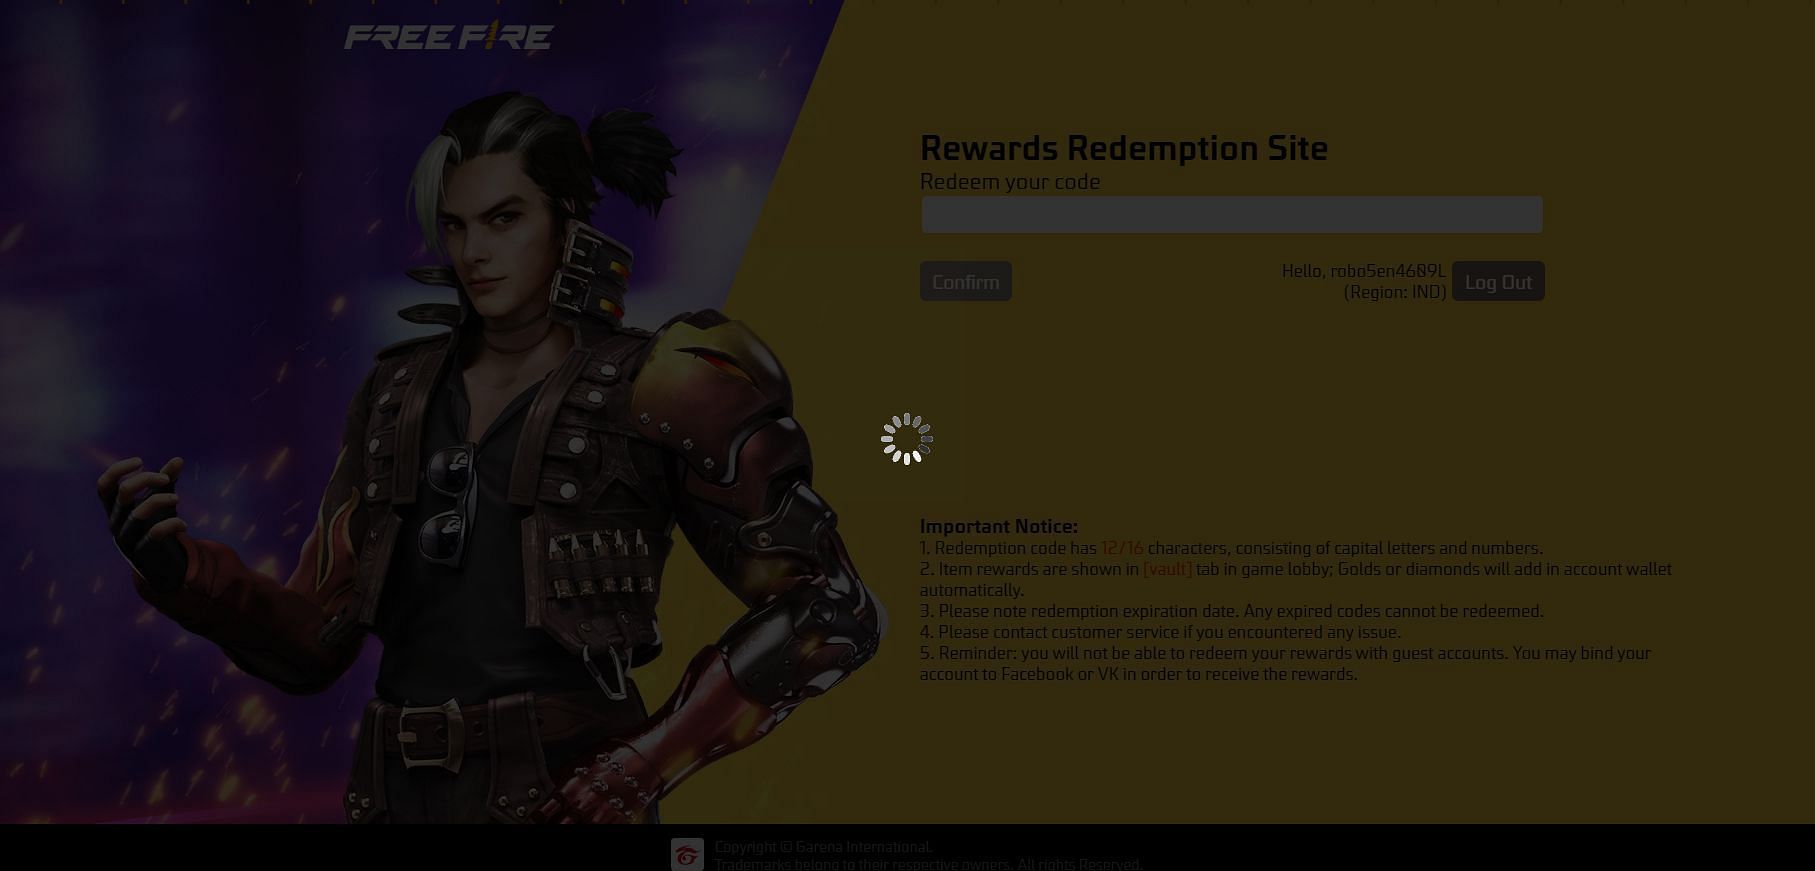 How to redeem an hourly redemption code? (Image via Garena)